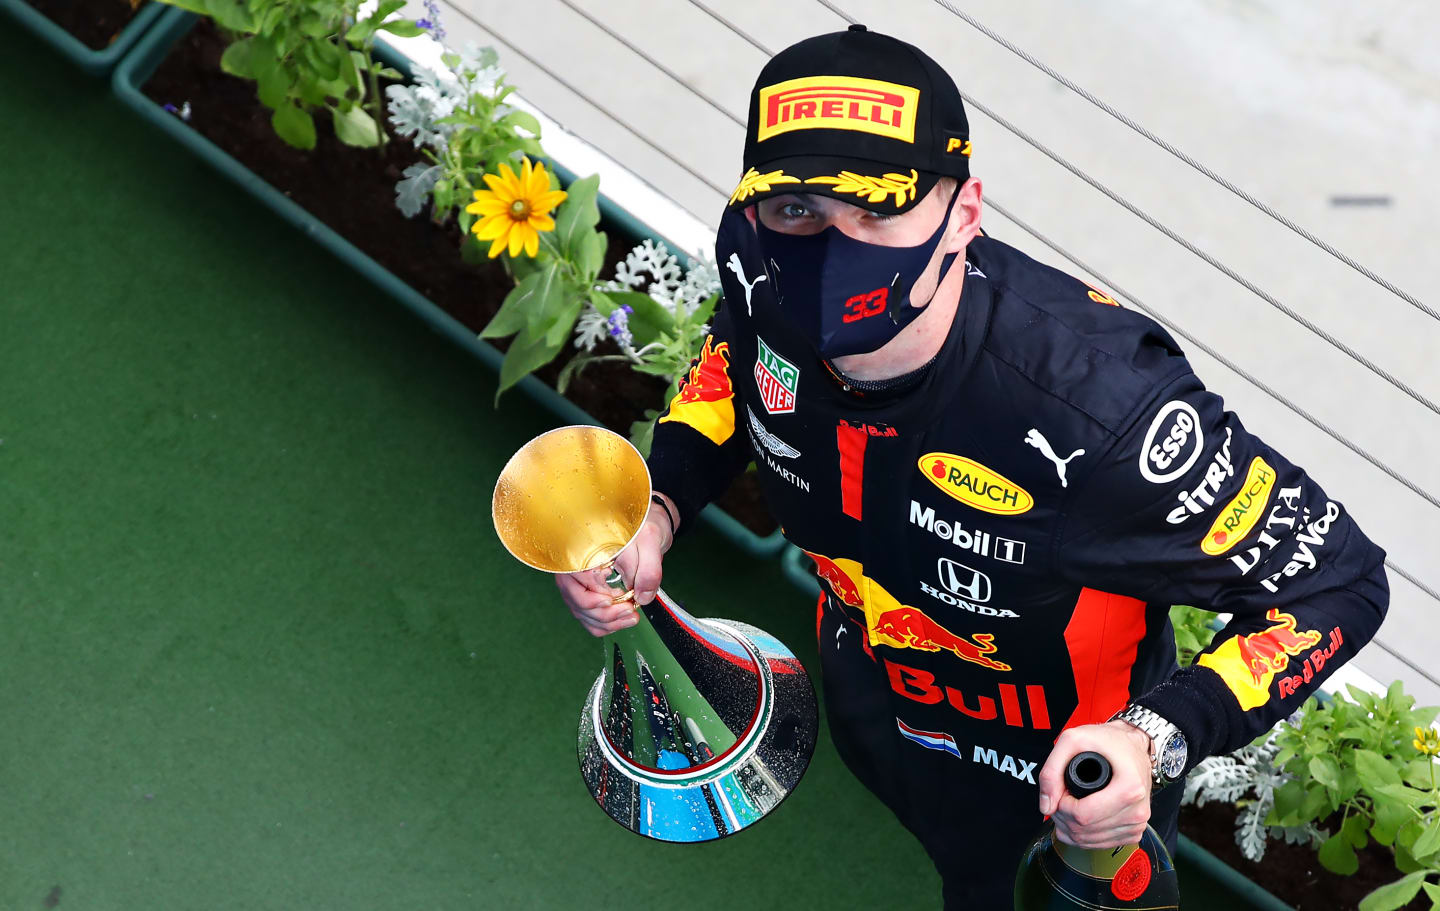 BUDAPEST, HUNGARY - JULY 19: Second placed Max Verstappen of Netherlands and Red Bull Racing celebrates on the podium during the Formula One Grand Prix of Hungary at Hungaroring on July 19, 2020 in Budapest, Hungary. (Photo by Mark Thompson/Getty Images)